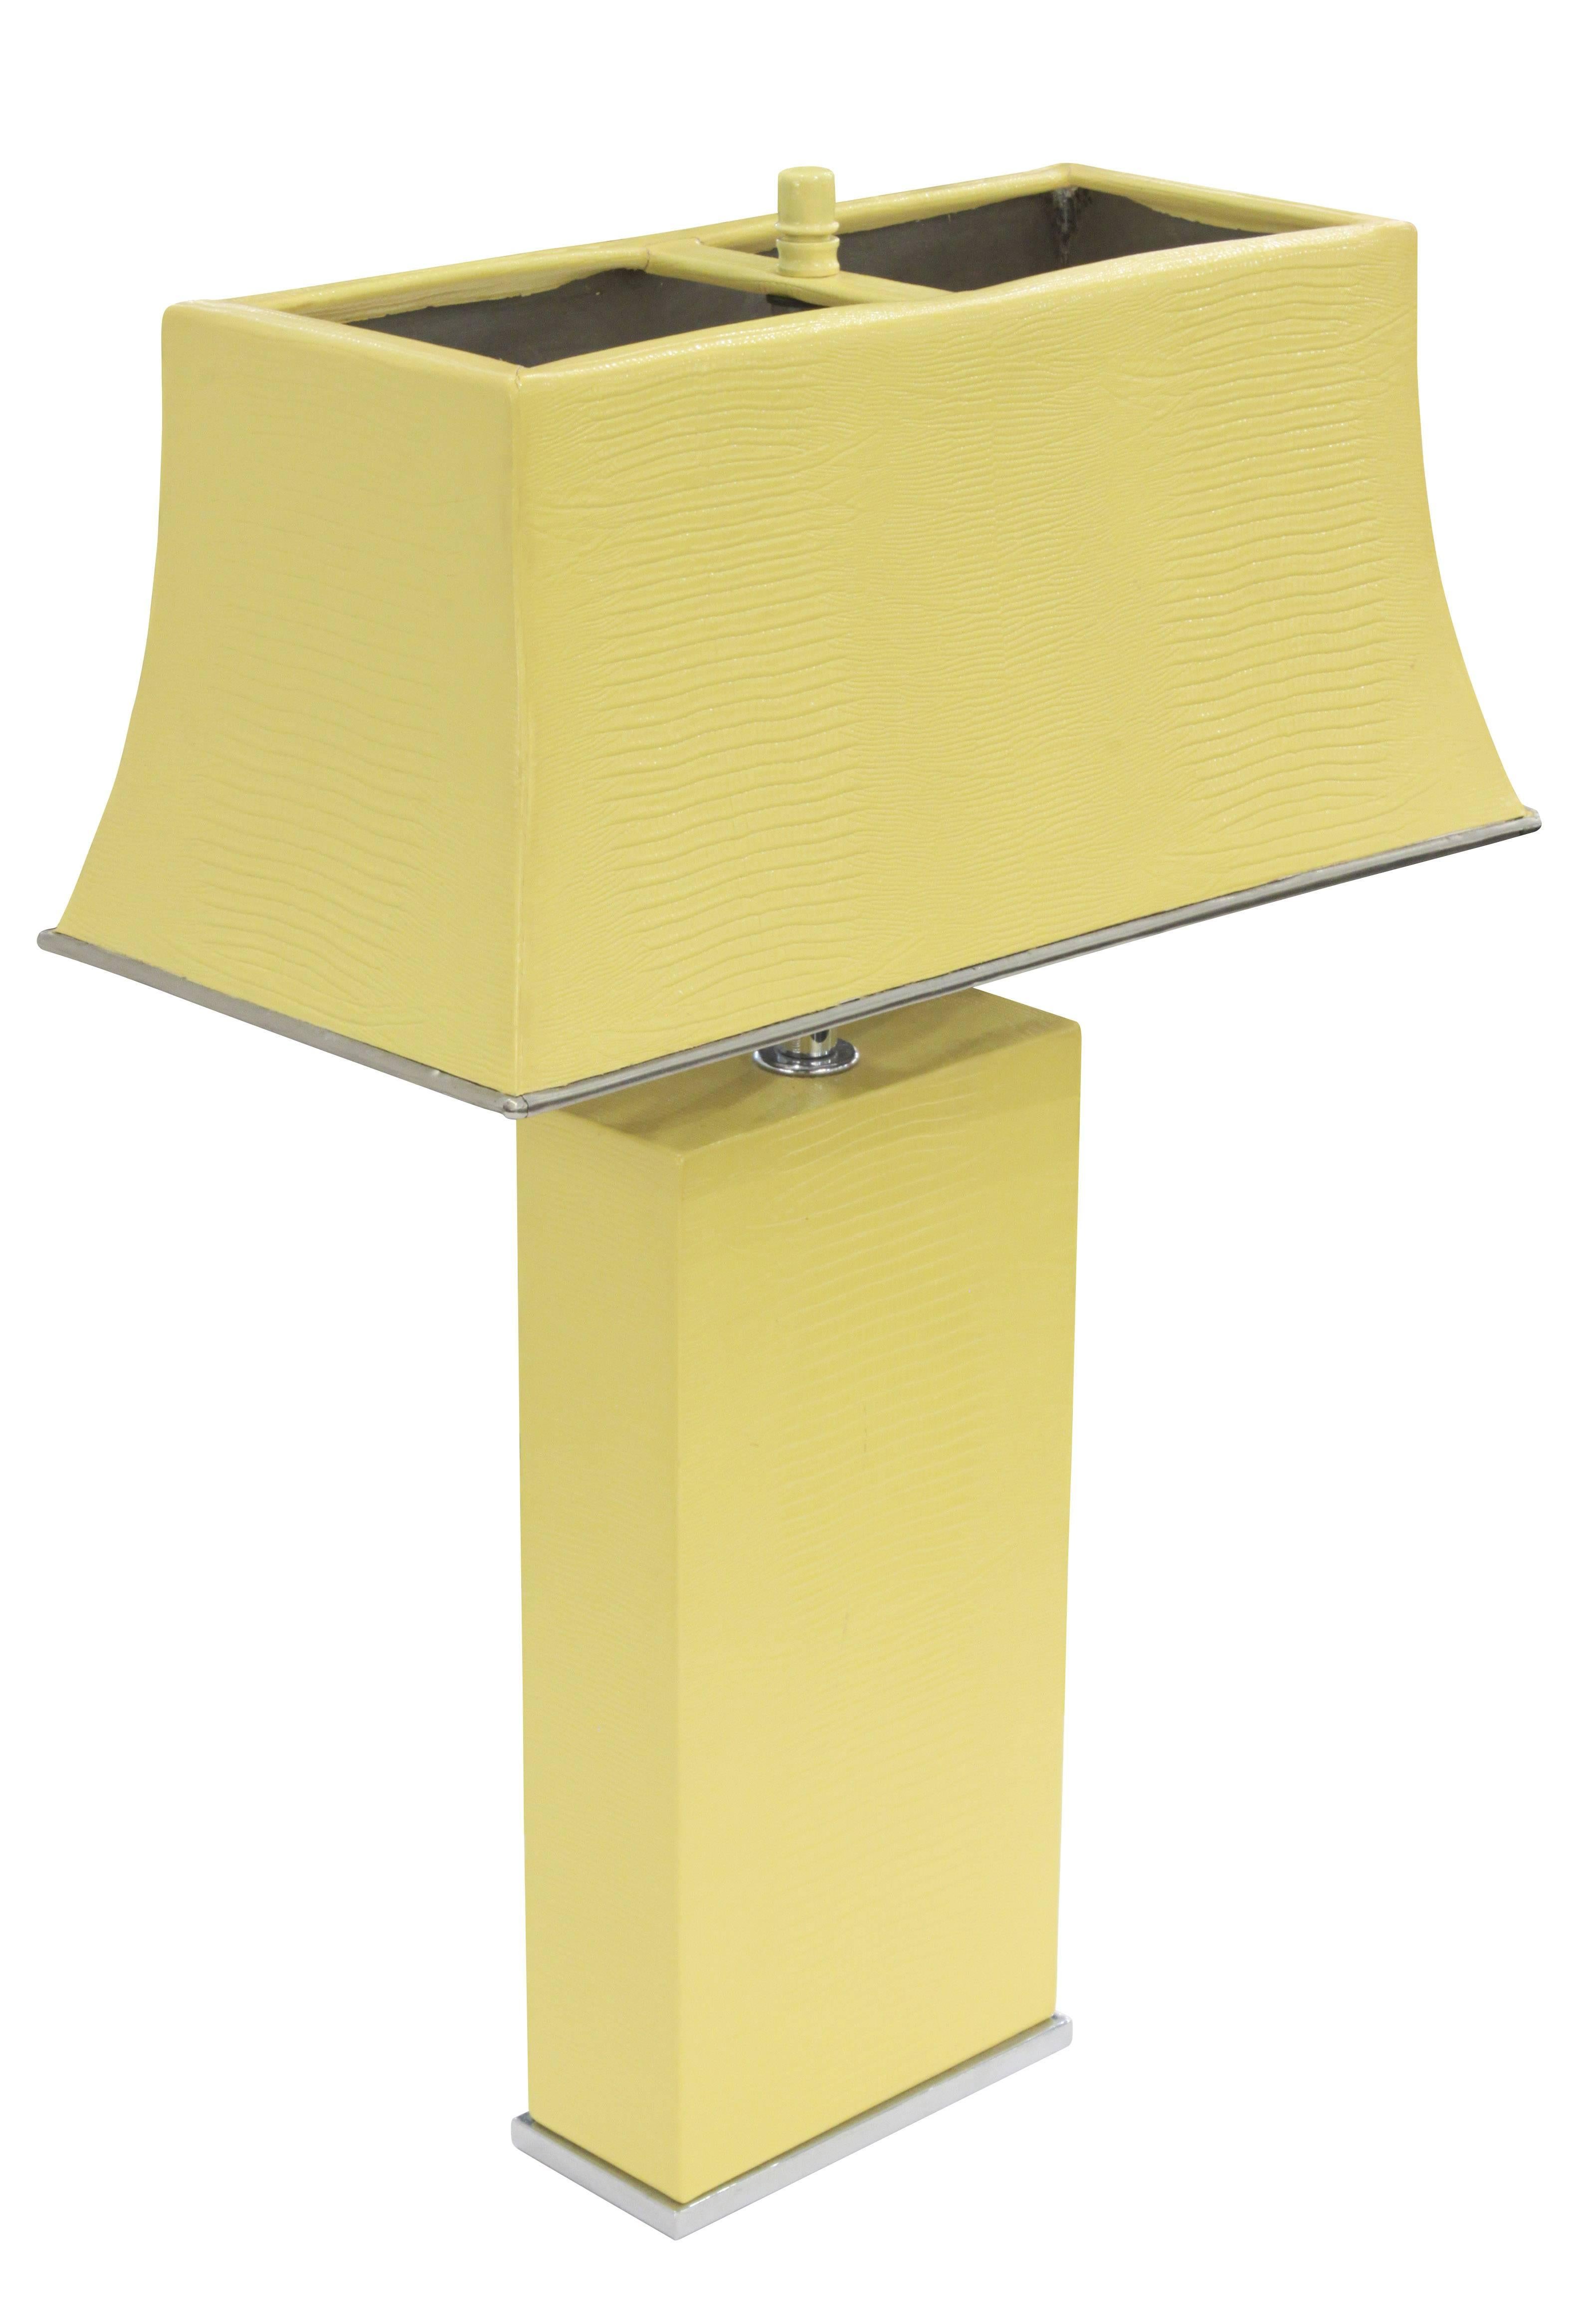 Exceptional table lamp with shade, both in steel clad in yellow embossed lizard leather, by Karl Springer, American 1974. Height is adjustable from 22” to 26”.
 